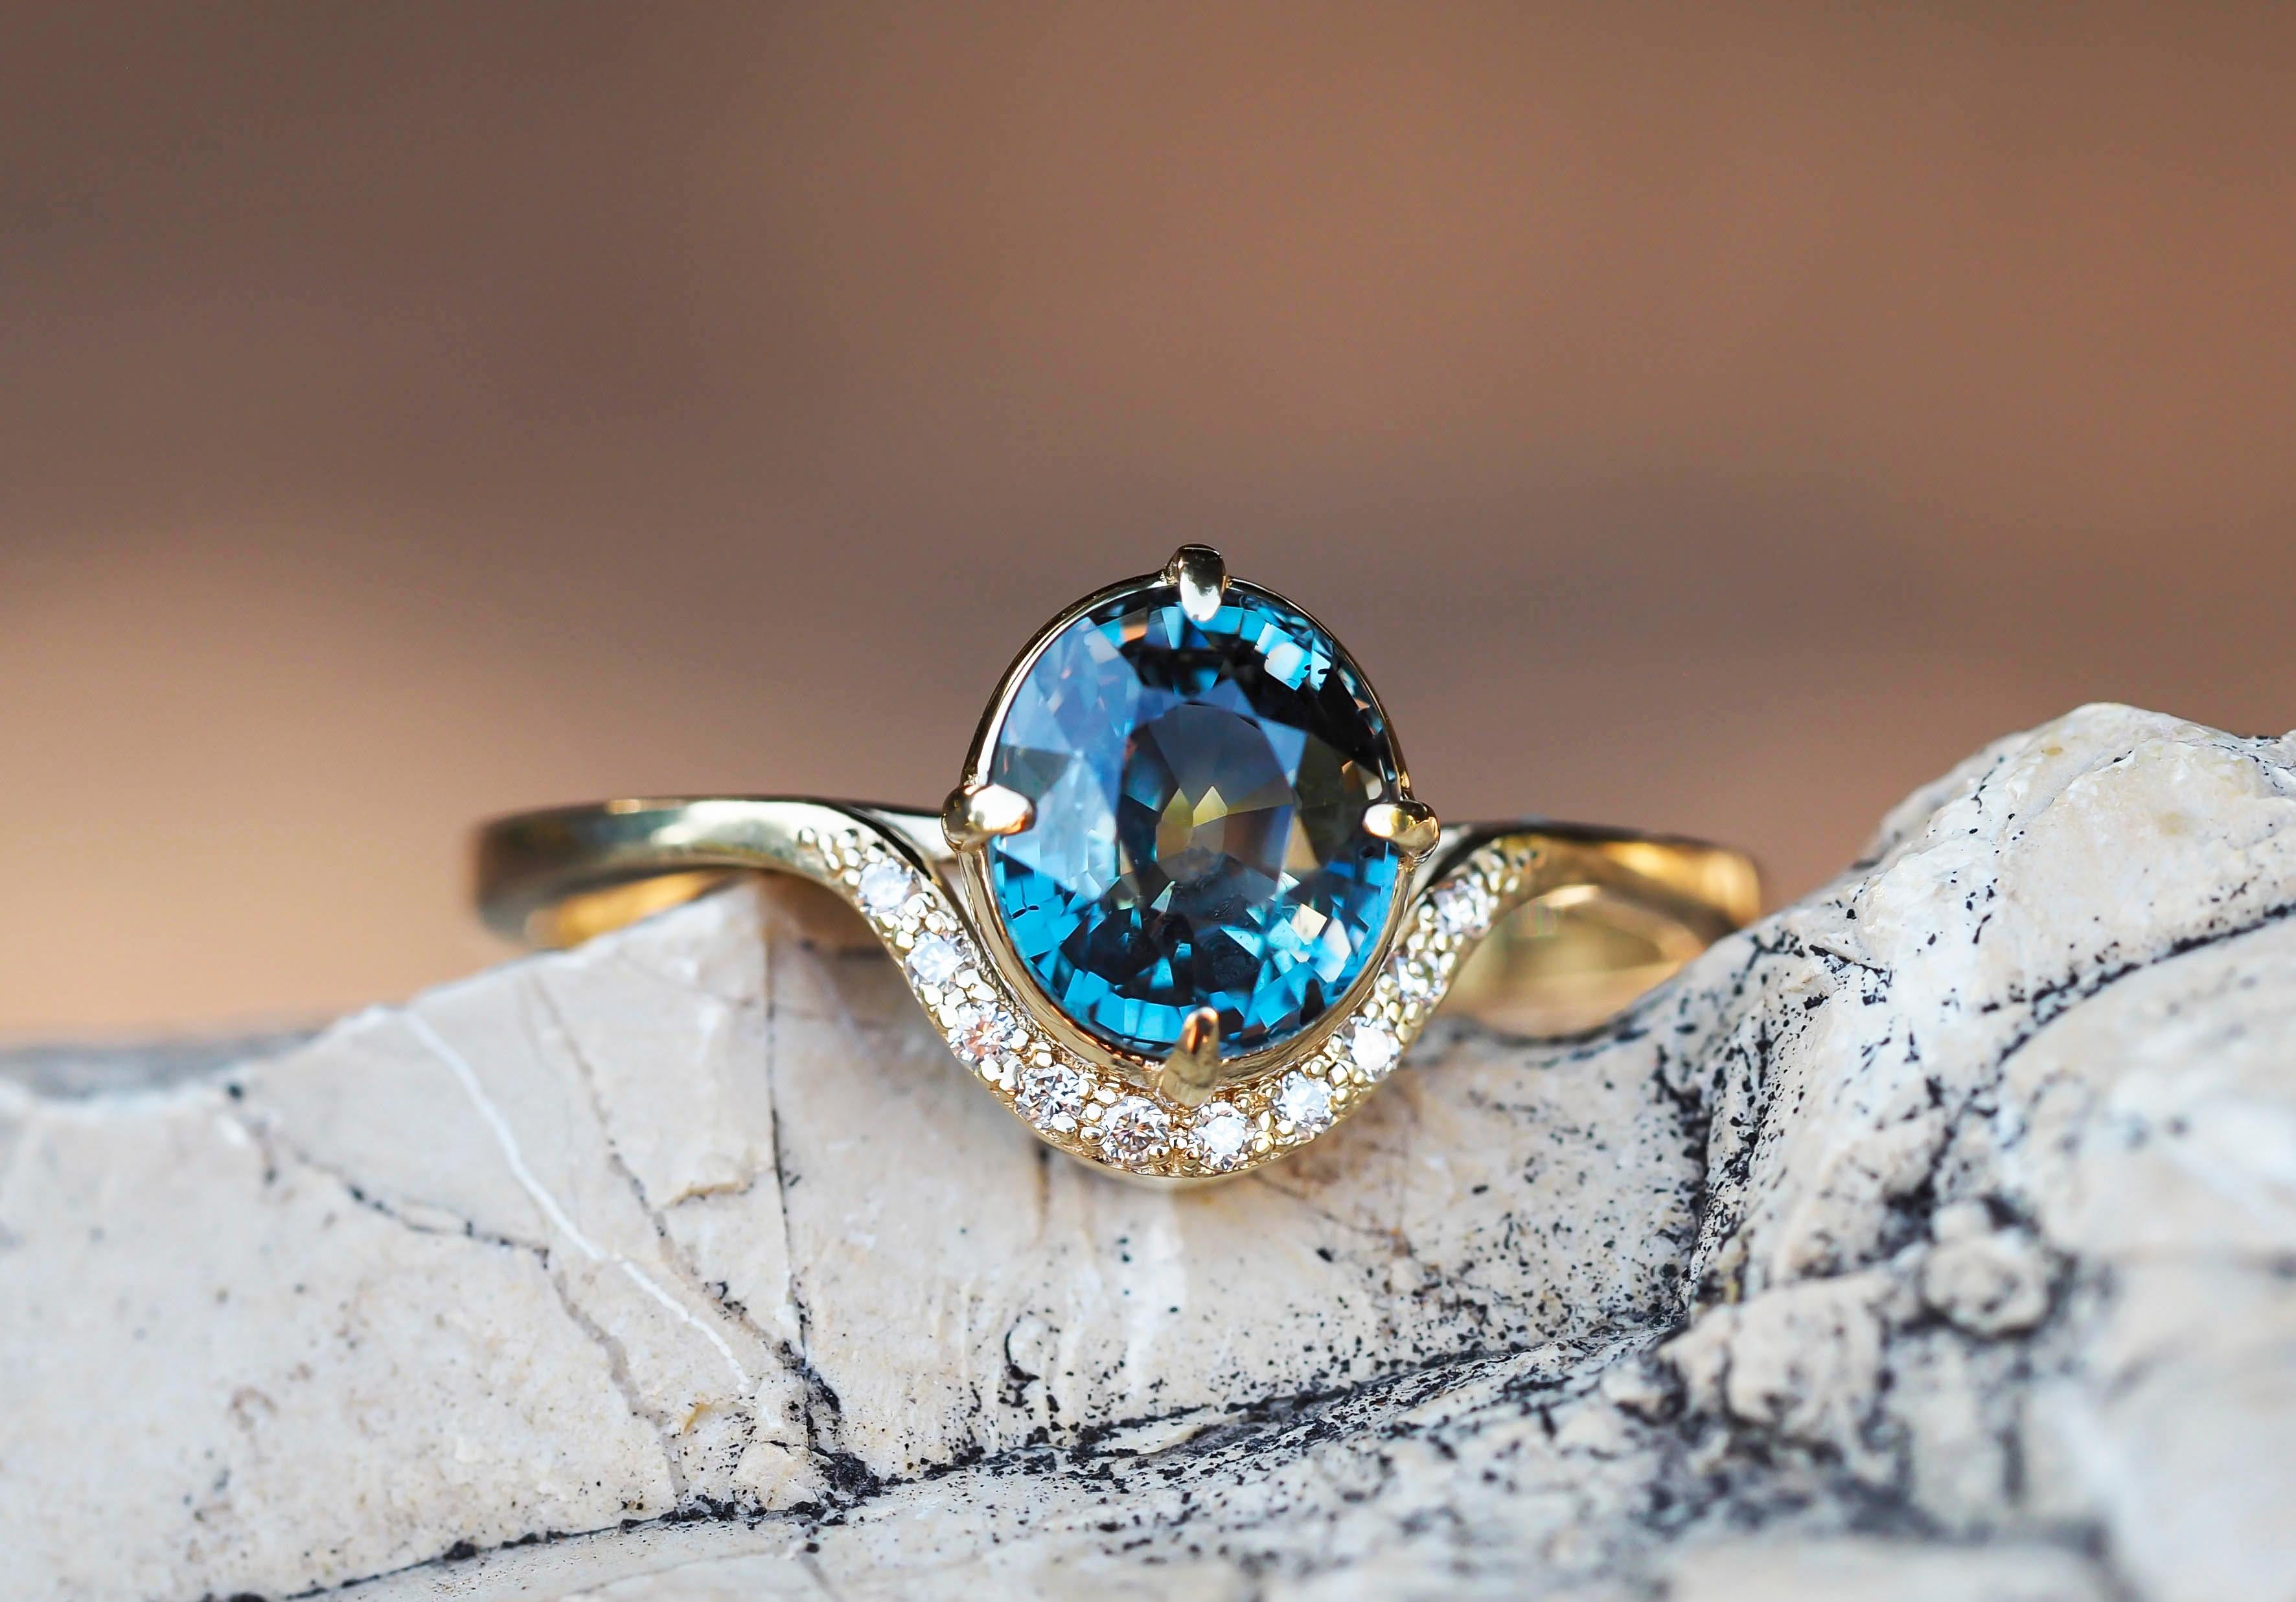 14 Kt Gold Ring with Sapphire and Diamonds 6